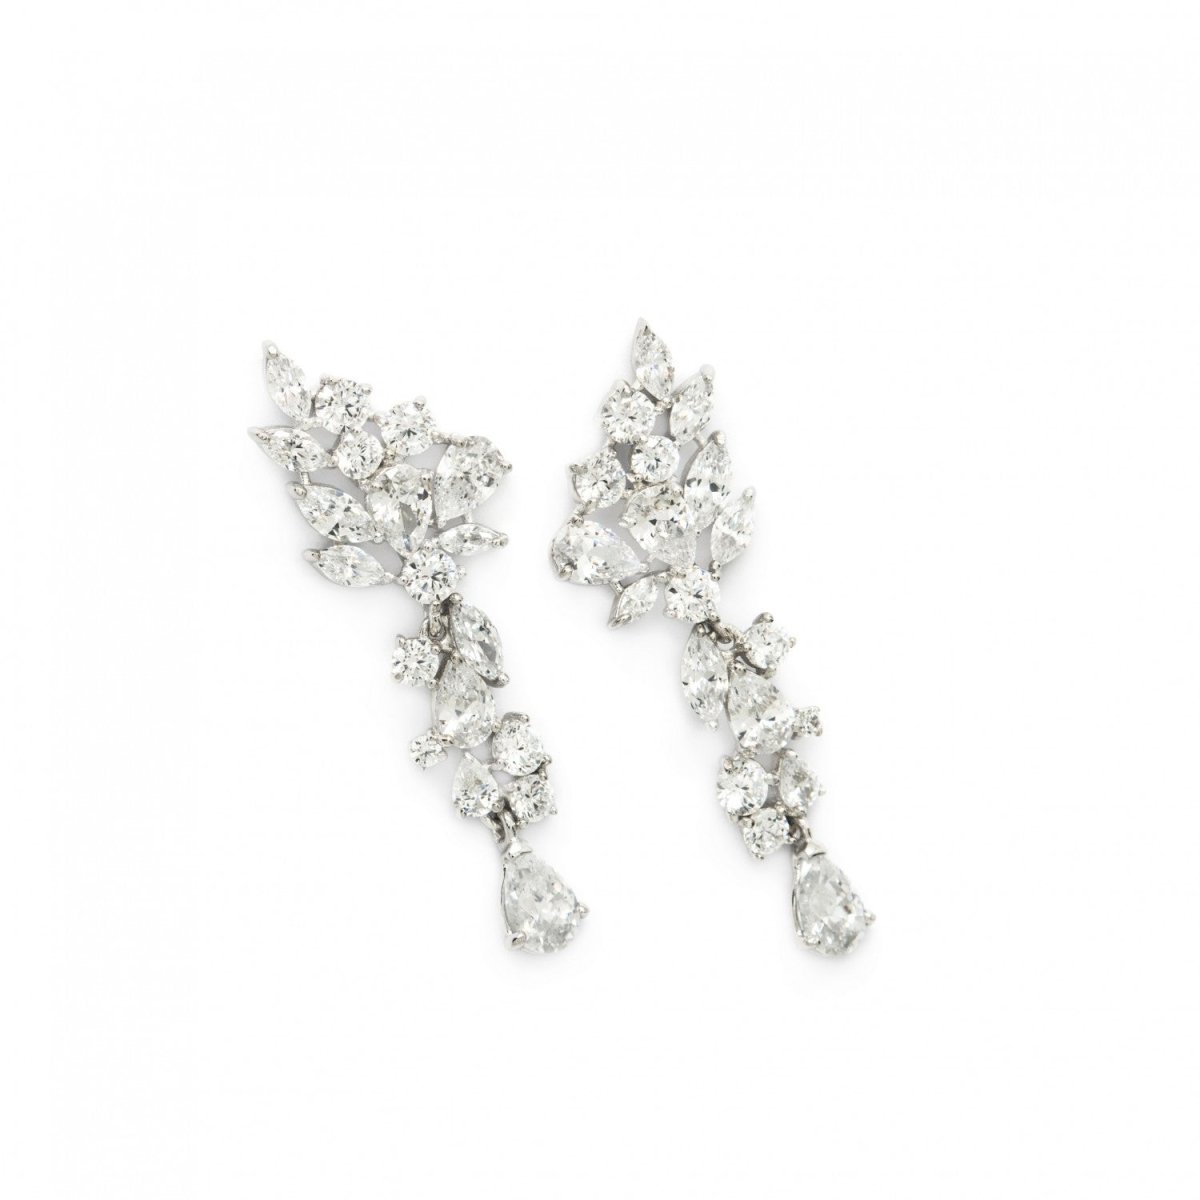 Earrings - Earrings bride silver and zirconia with different sizes